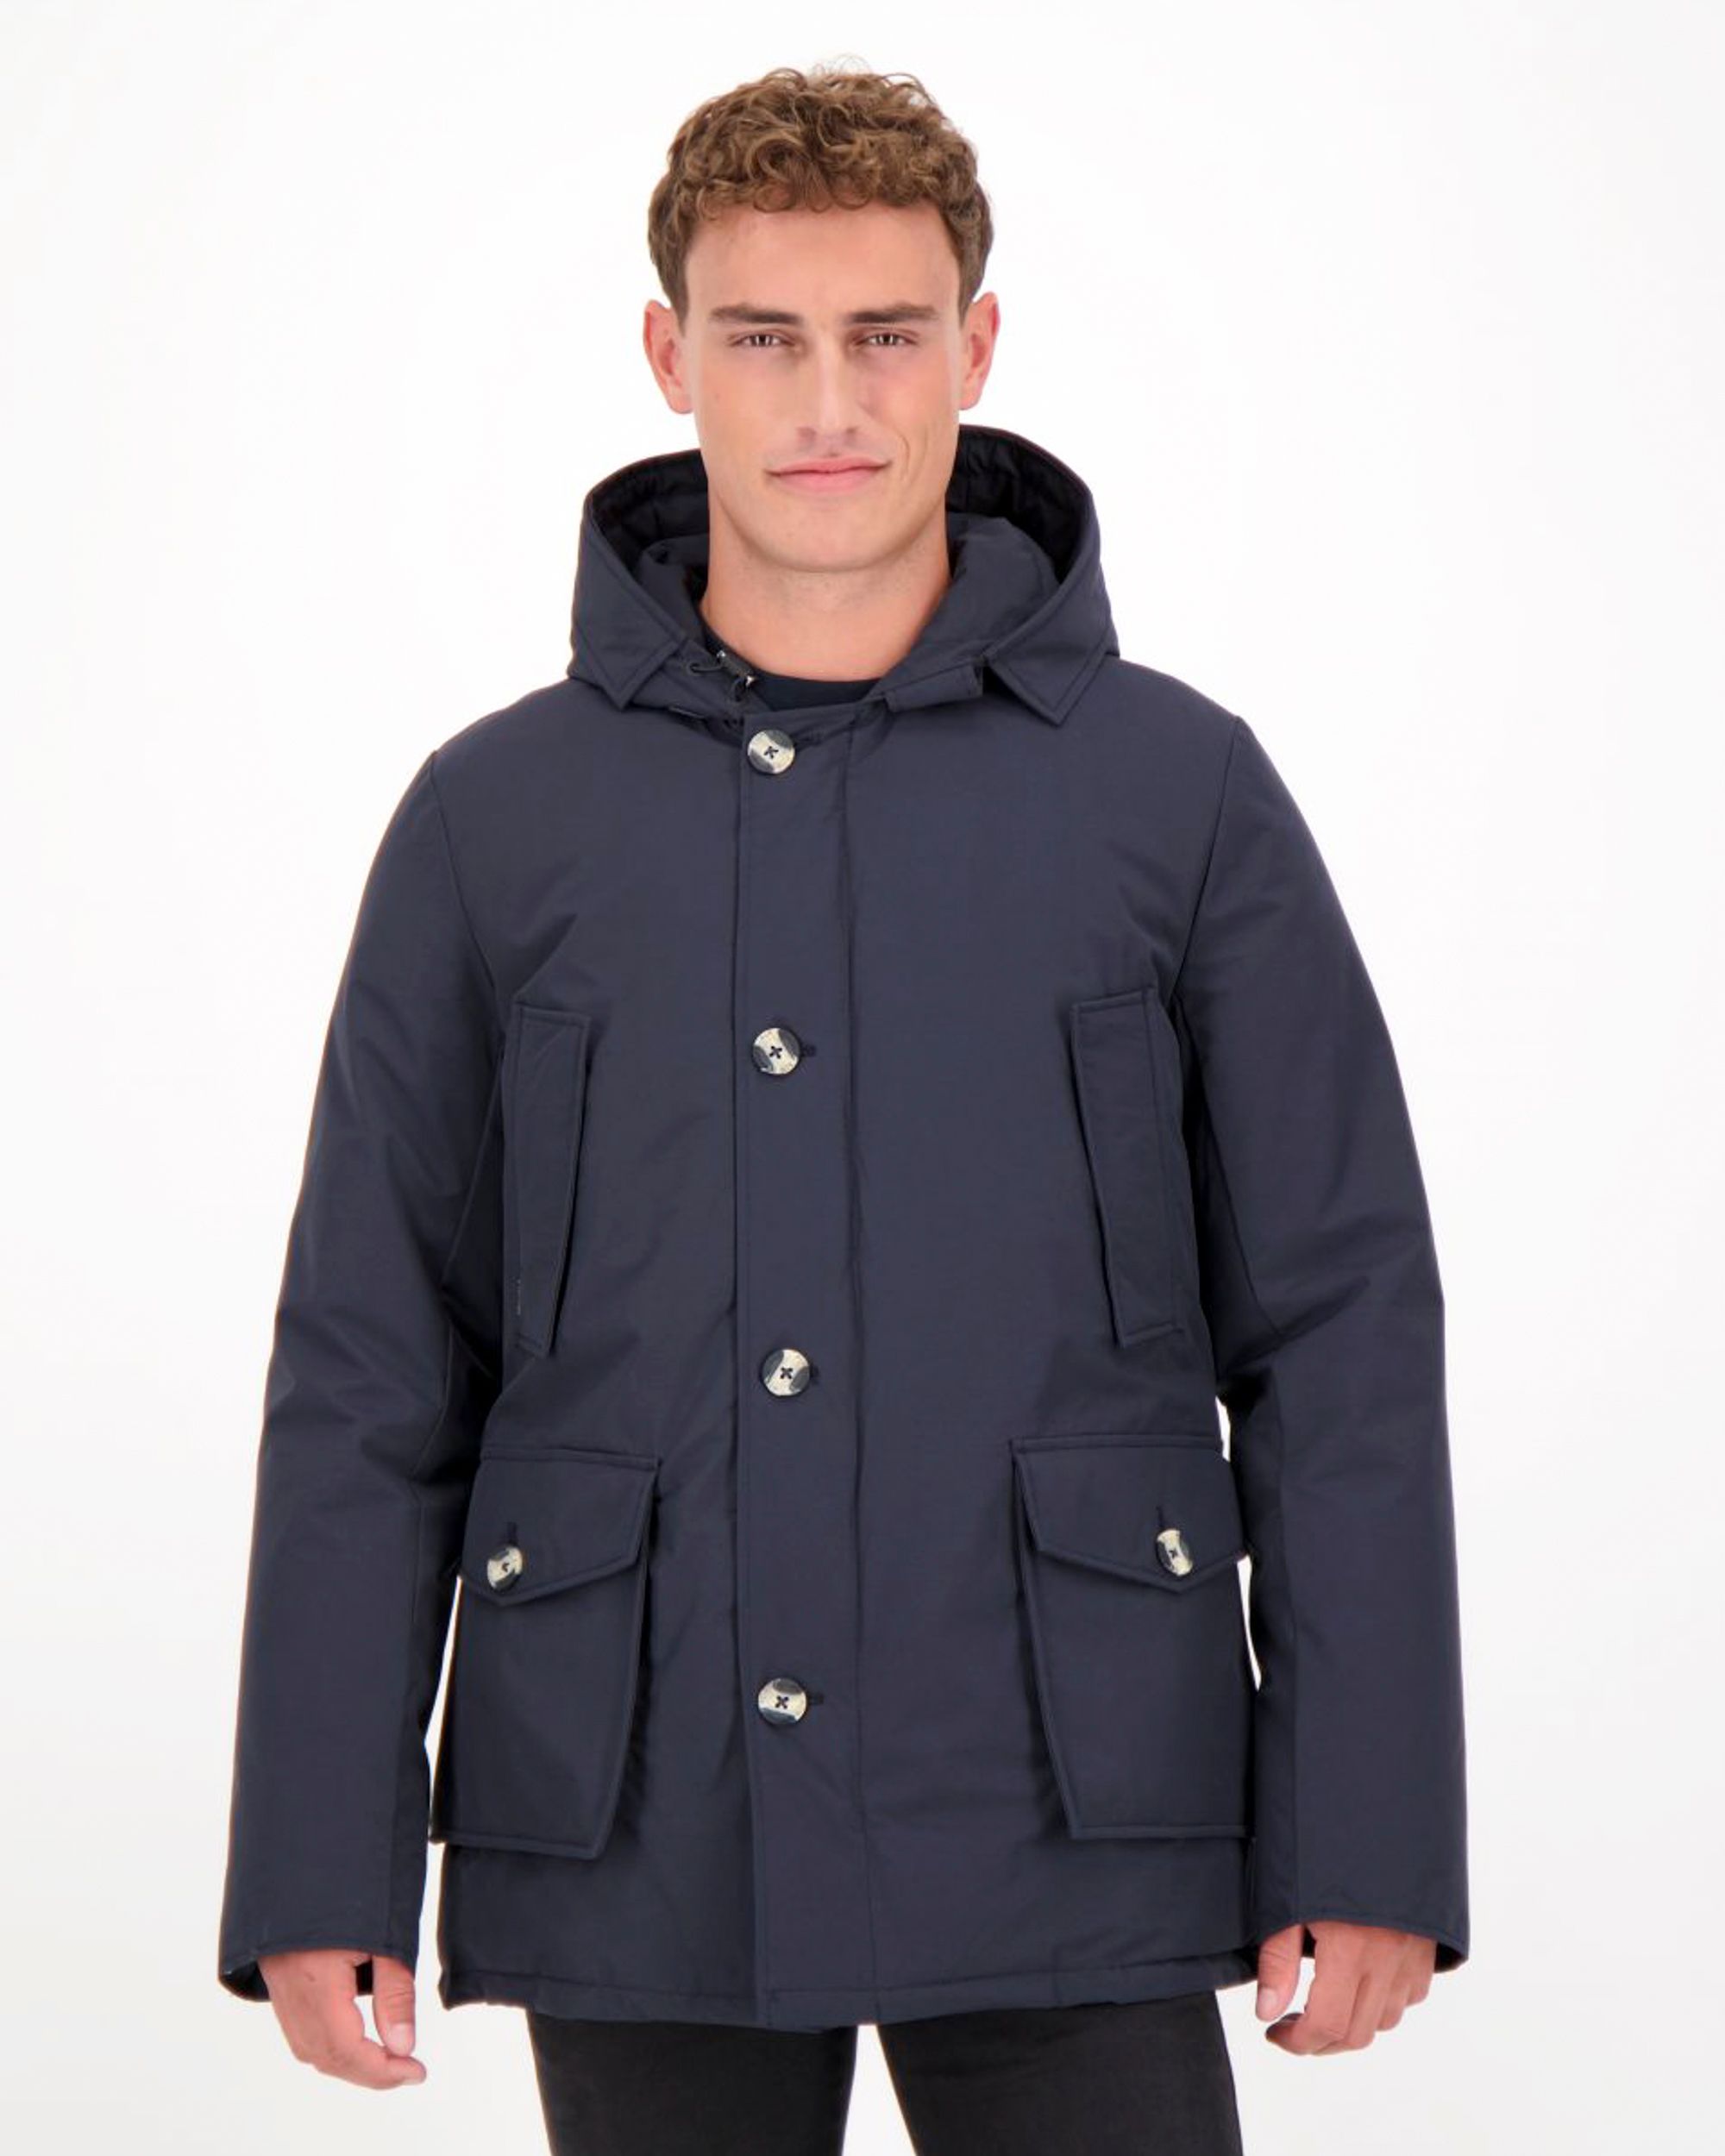 Airforce Classic Parka Donker blauw 079390-001-L